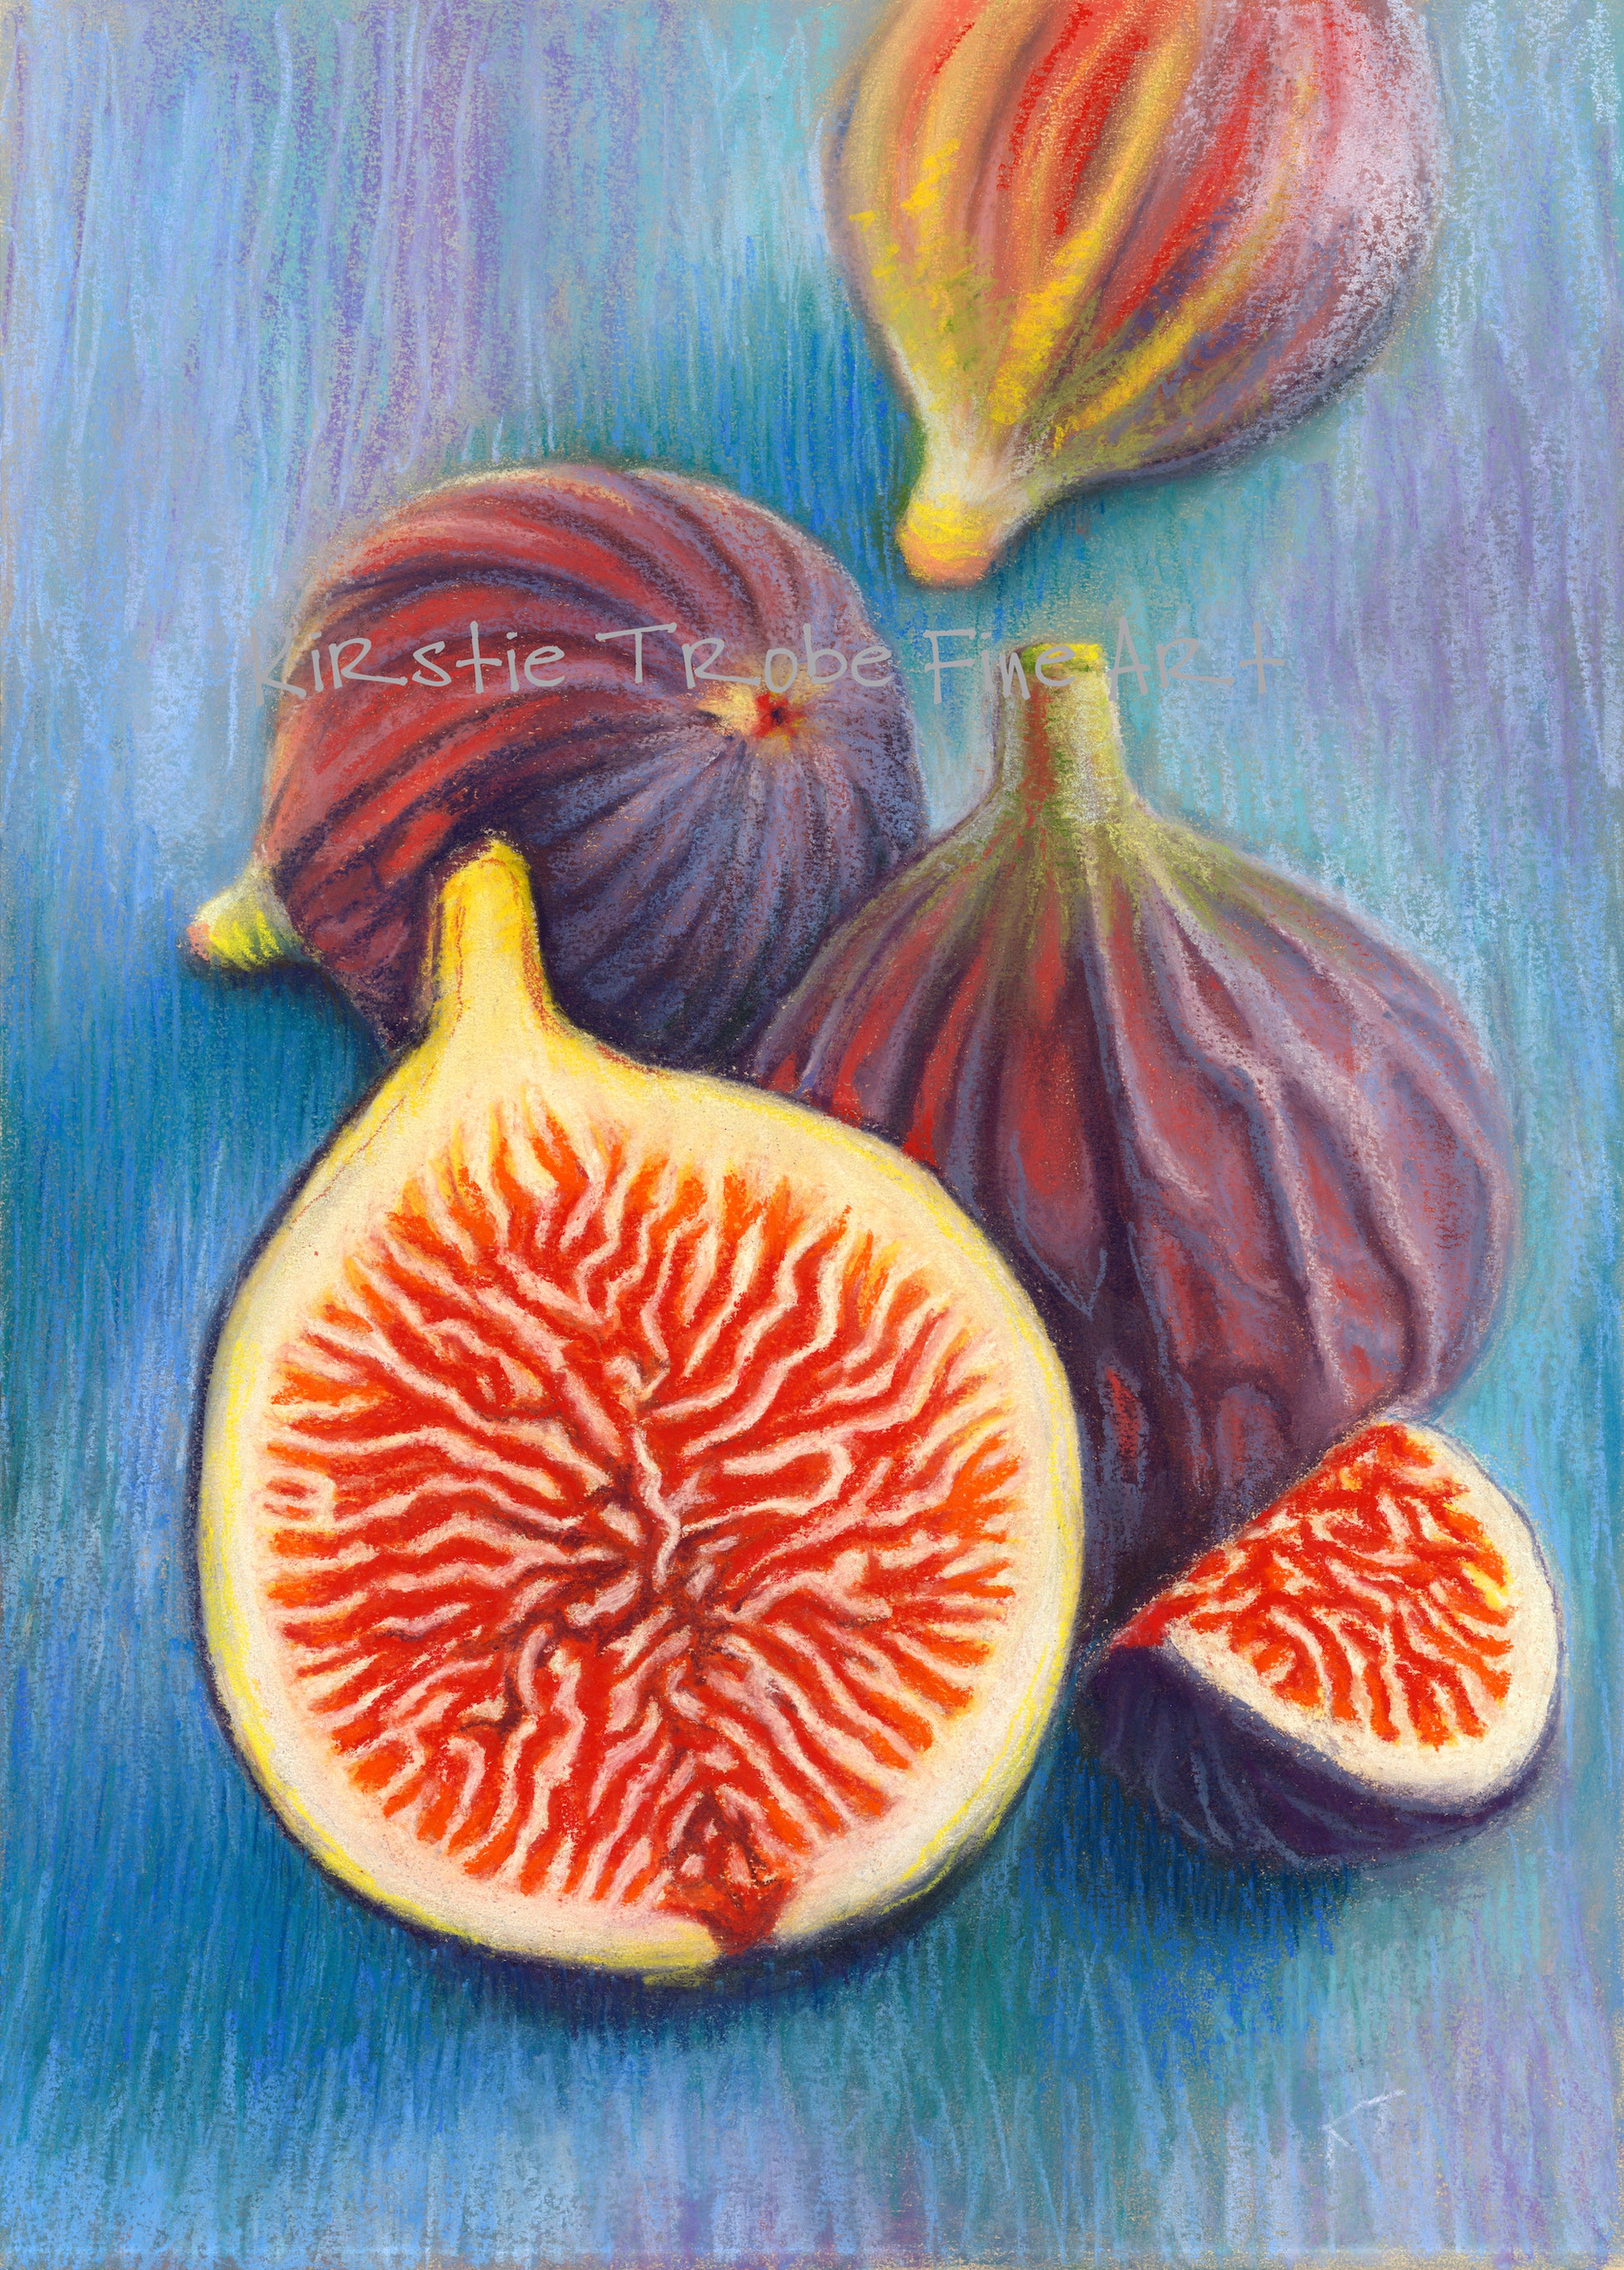 A pastel still life of several figs, depicted as whole and sliced. The vibrant, bright colours of their flesh contrasting with the muted tones of their skins are set against the turquoise and mauve background.